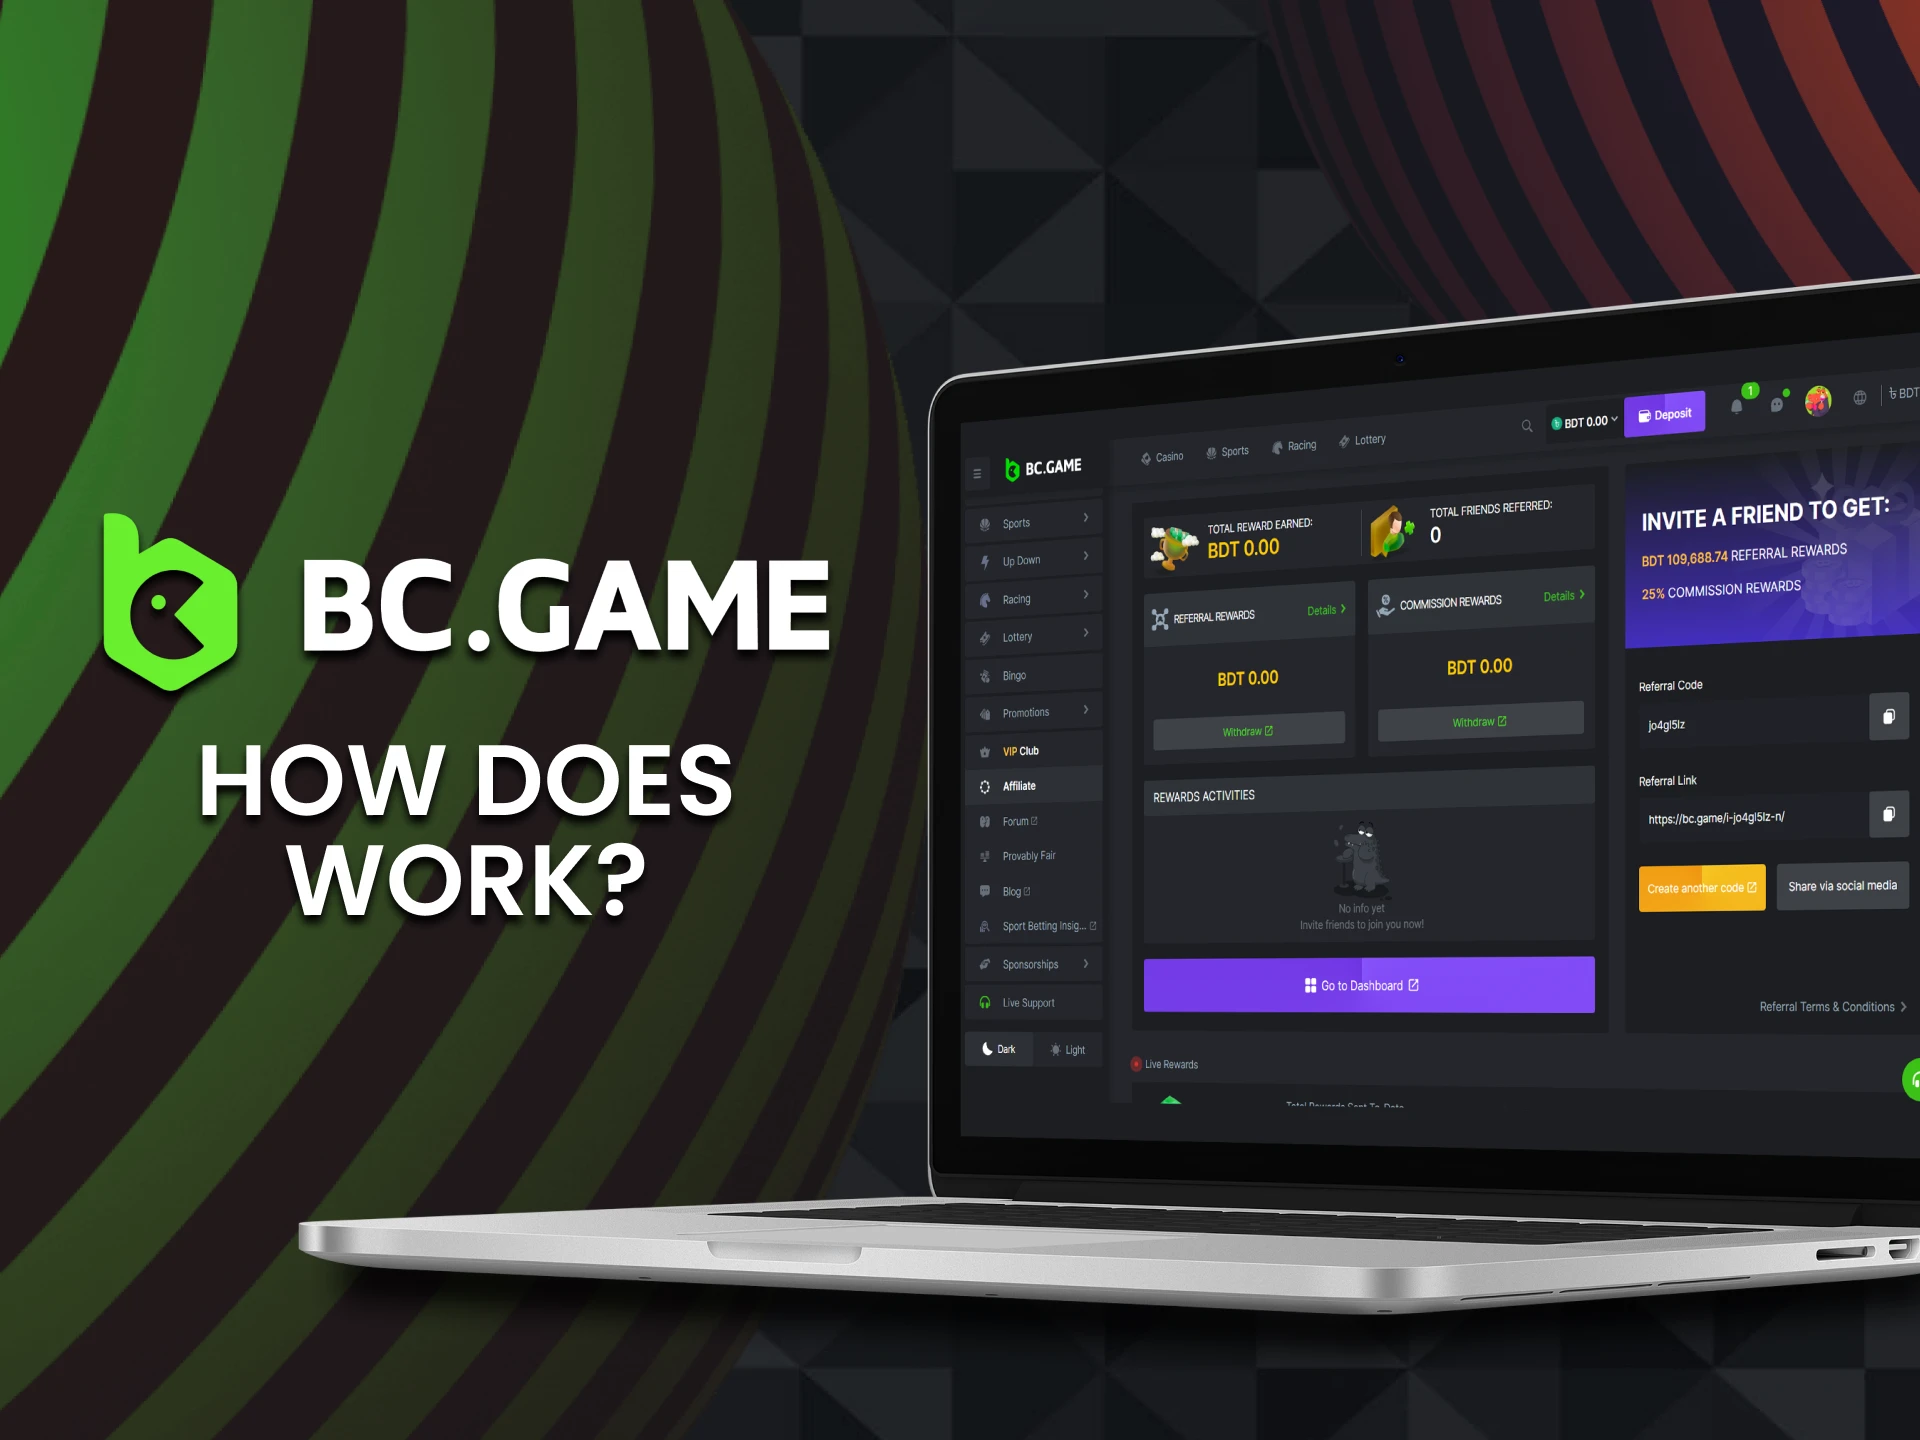 We will show you how the BCGame affiliate program works.